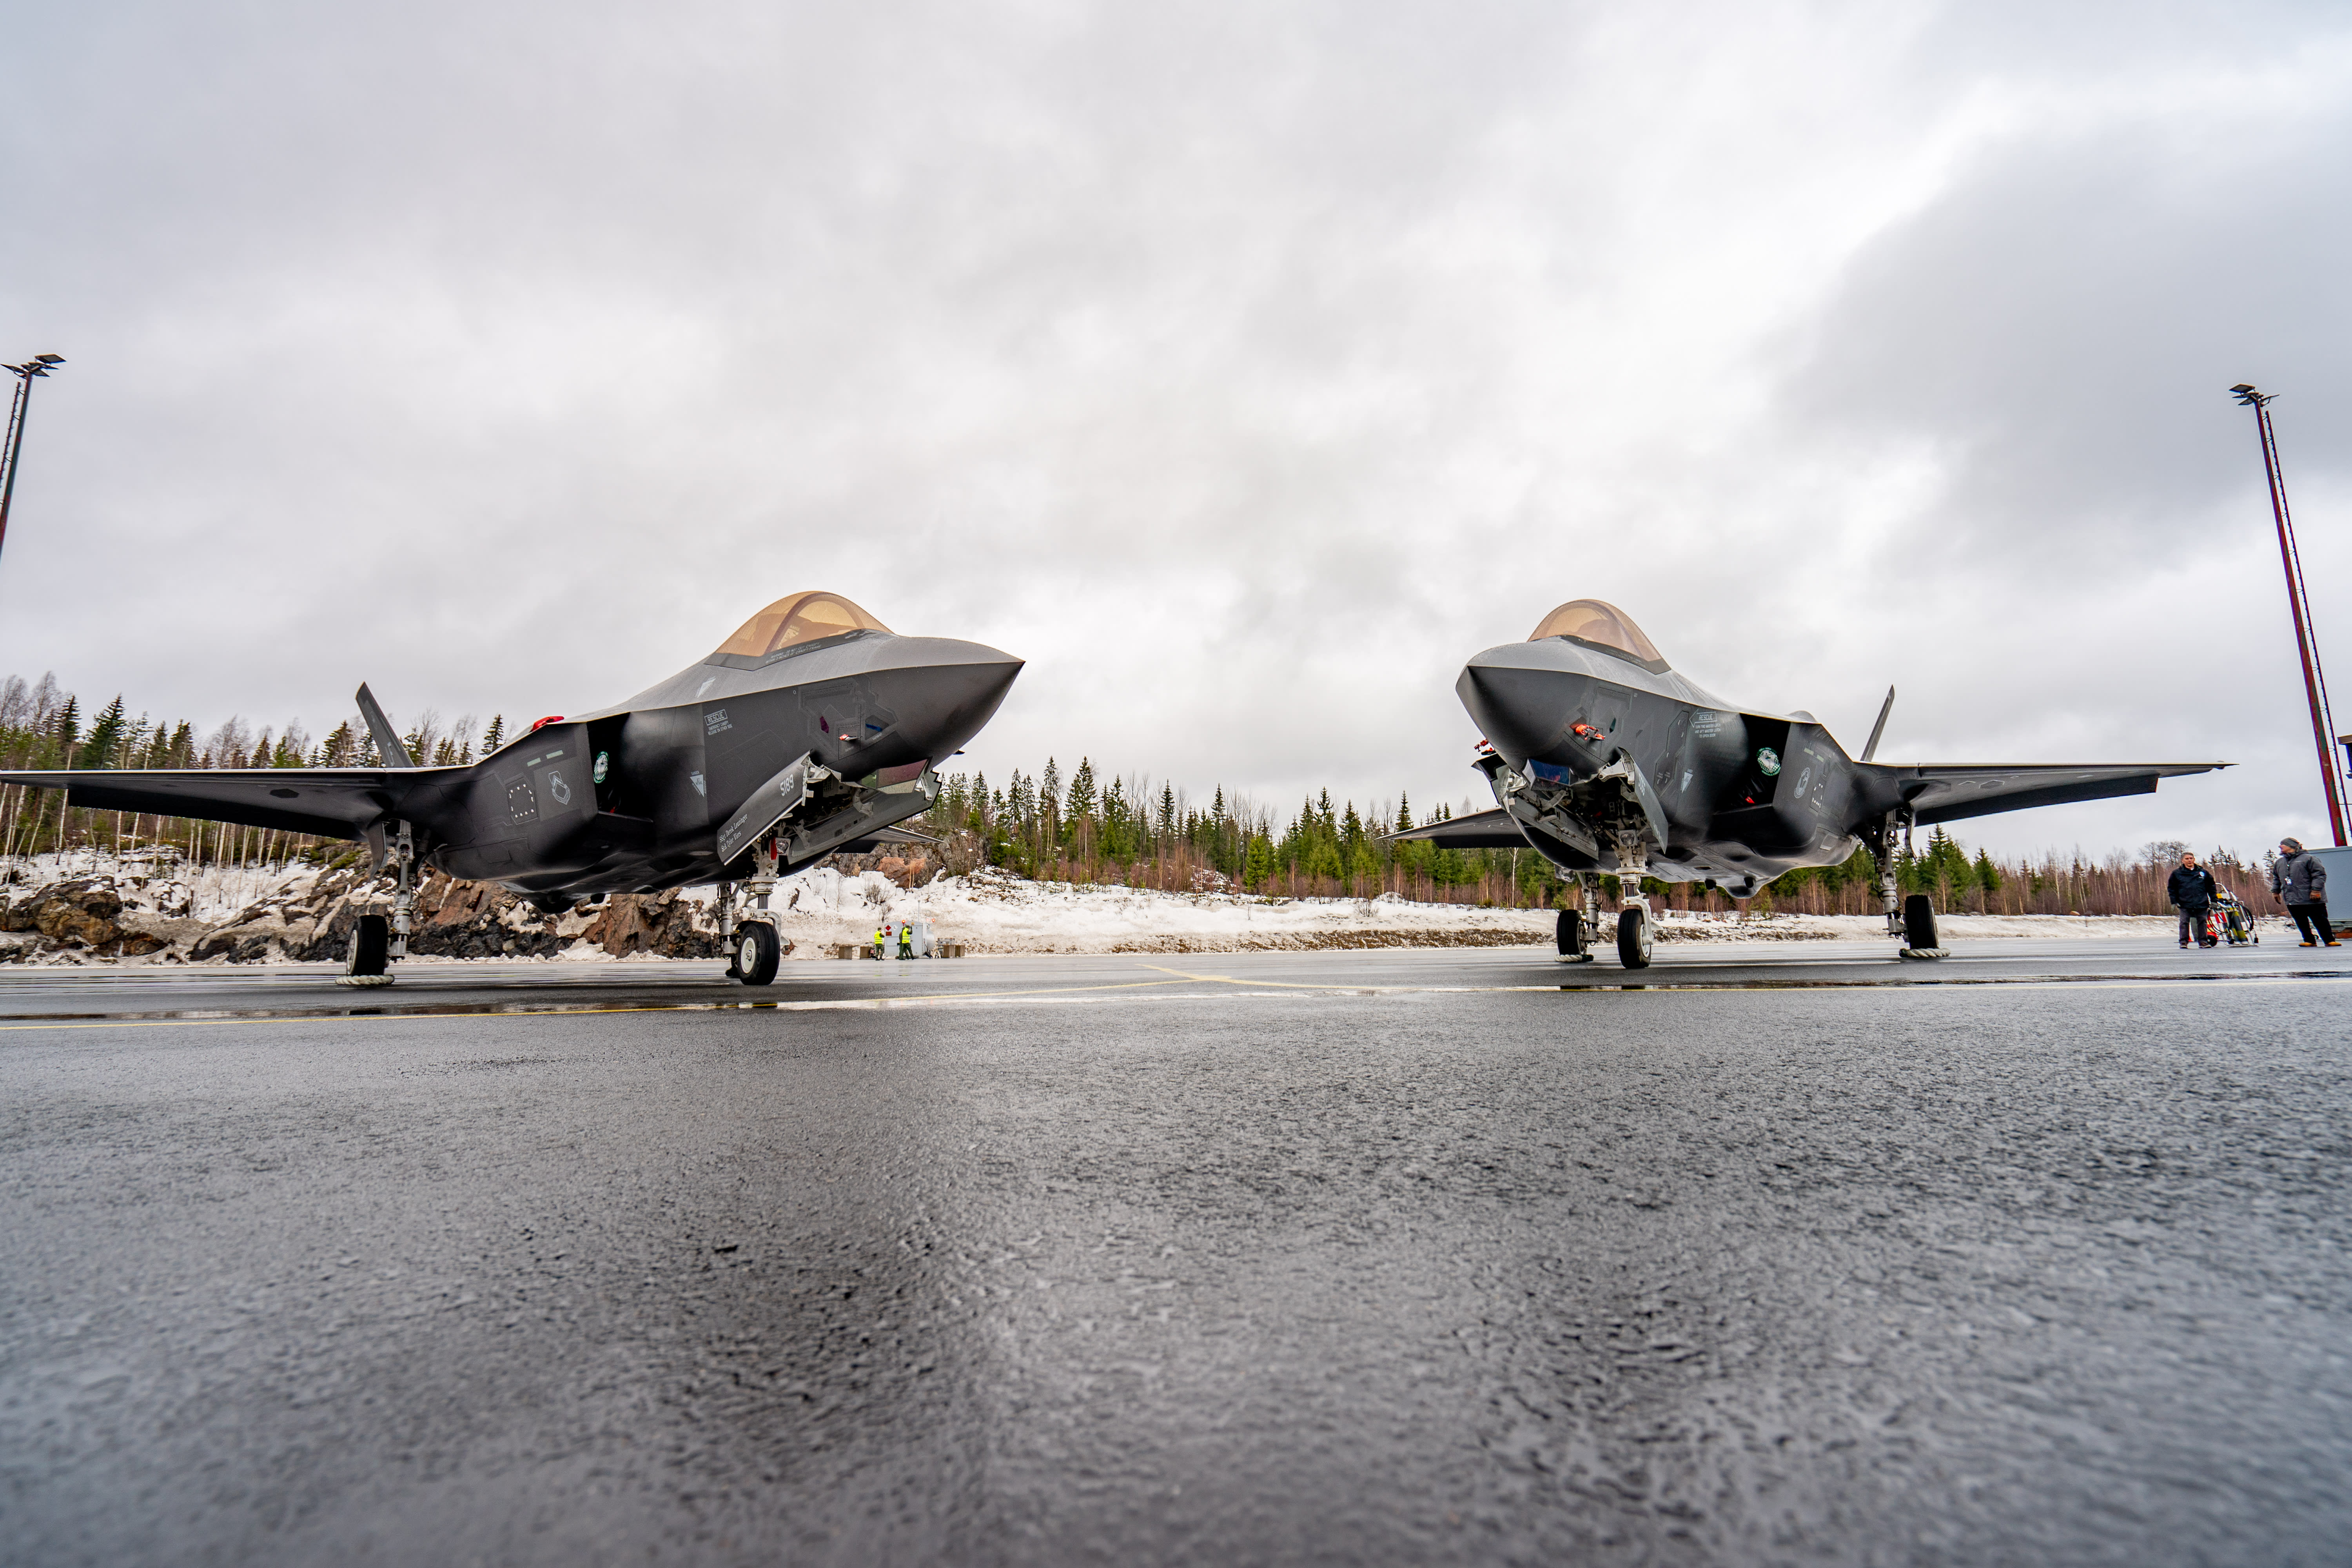 Lapland was the first to receive new F-35 fighters